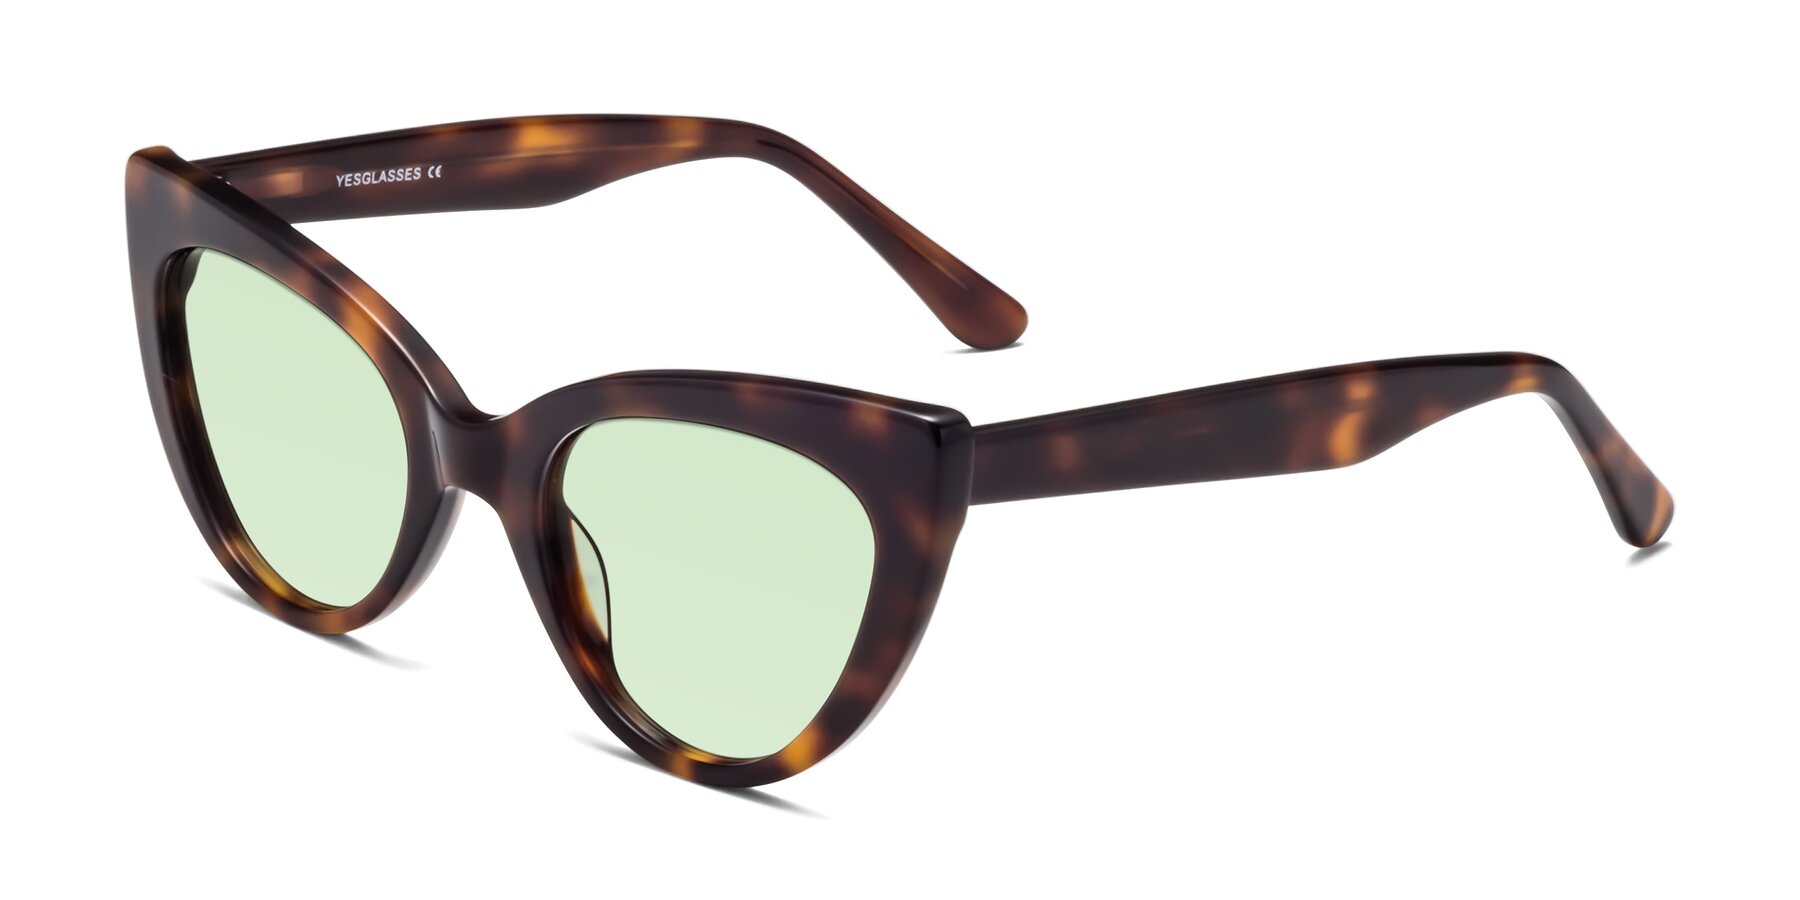 Angle of Tiesi in Tortoise with Light Green Tinted Lenses